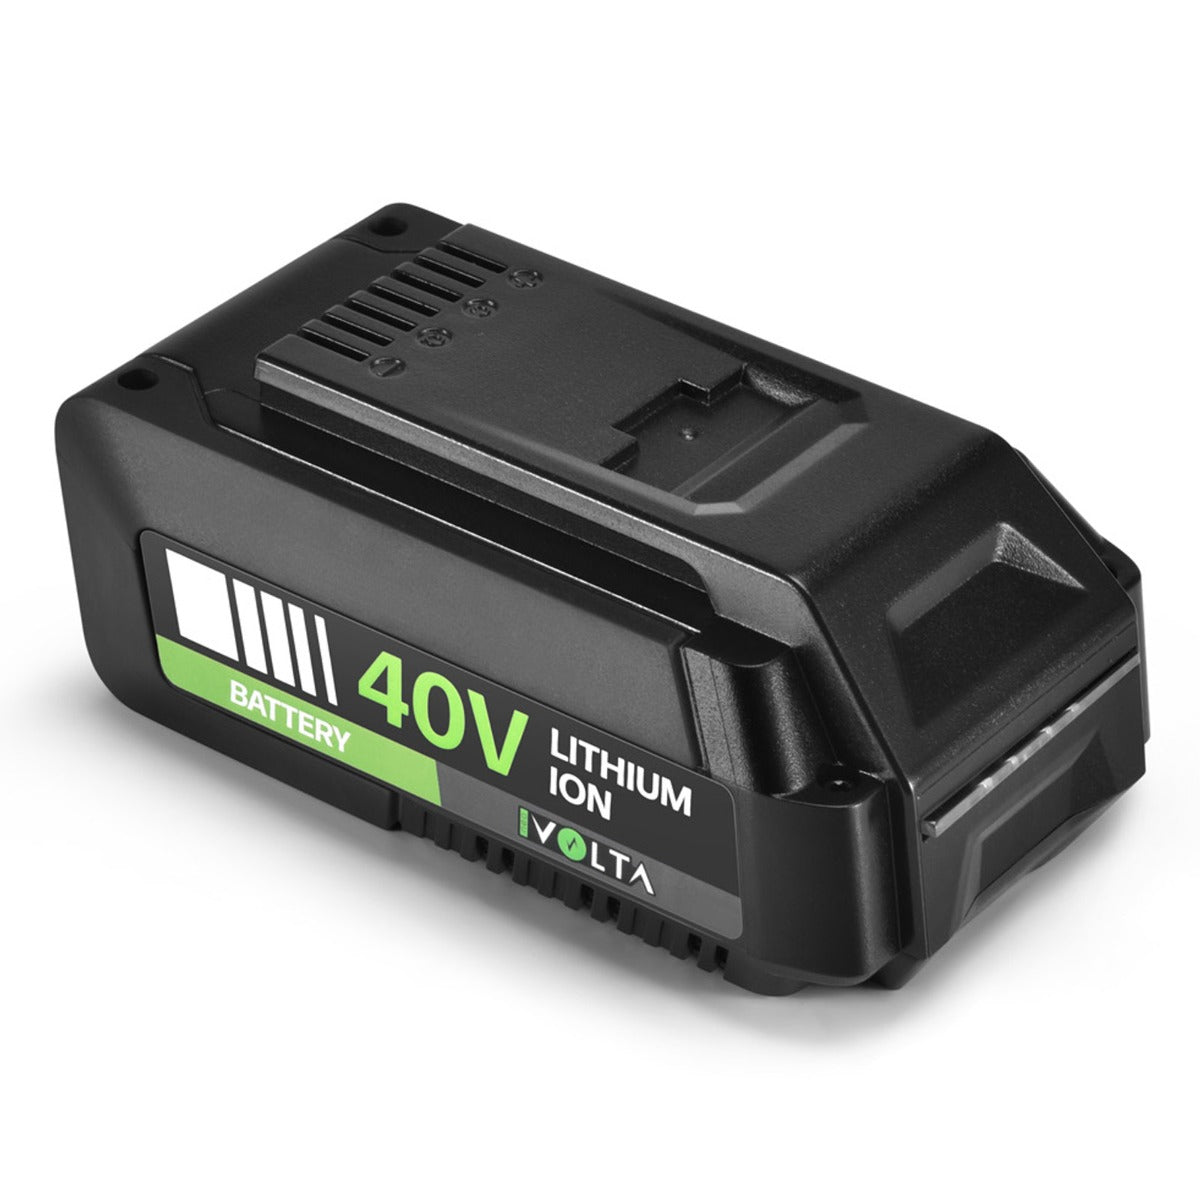 Neovolta 40V 4.0Ah Lithium-Ion Battery Pack Garden Tools LED Display